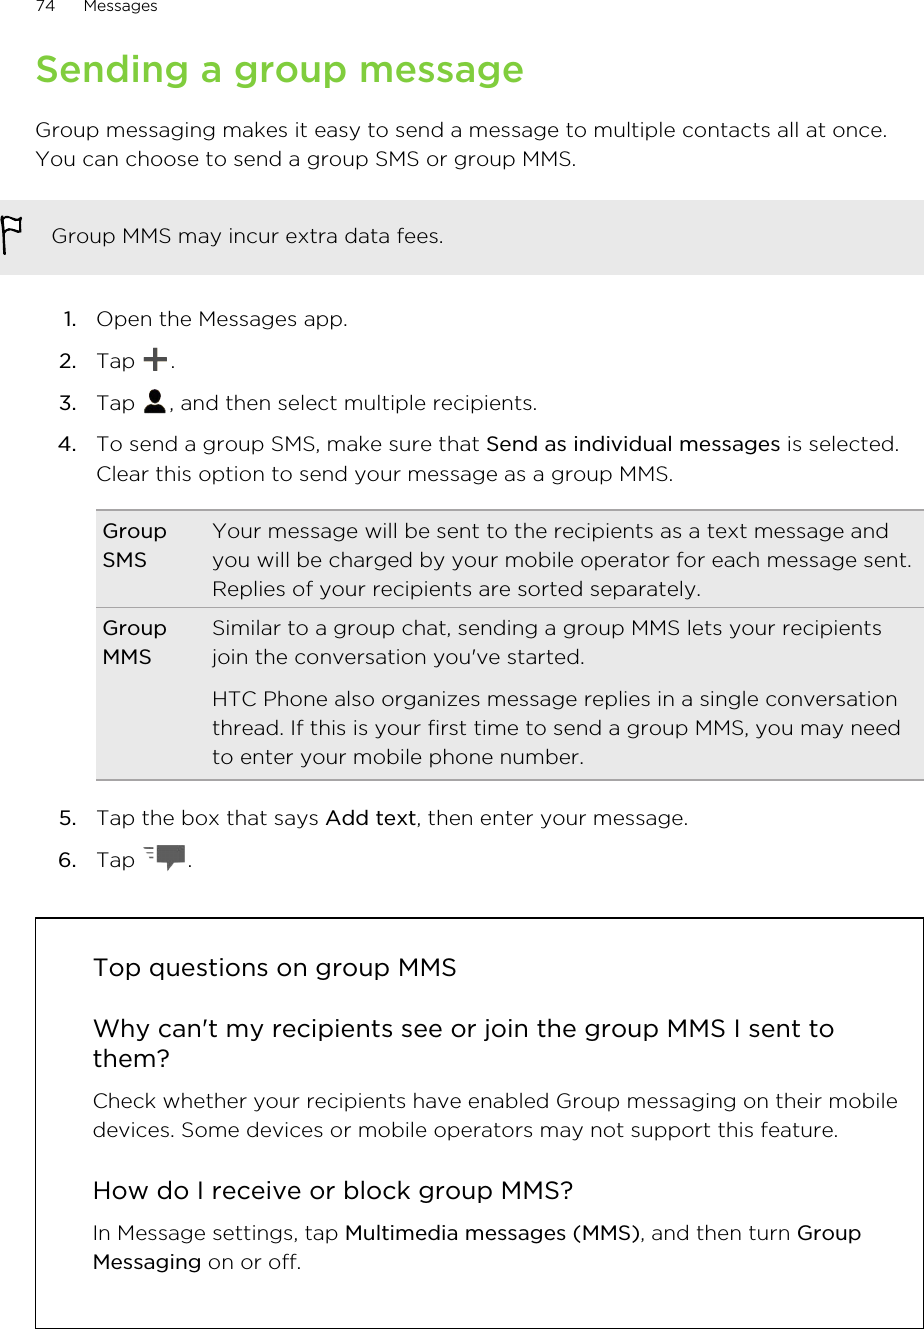 Sending a group messageGroup messaging makes it easy to send a message to multiple contacts all at once.You can choose to send a group SMS or group MMS.Group MMS may incur extra data fees.1. Open the Messages app.2. Tap  .3. Tap  , and then select multiple recipients.4. To send a group SMS, make sure that Send as individual messages is selected.Clear this option to send your message as a group MMS.GroupSMSYour message will be sent to the recipients as a text message andyou will be charged by your mobile operator for each message sent.Replies of your recipients are sorted separately.GroupMMSSimilar to a group chat, sending a group MMS lets your recipientsjoin the conversation you&apos;ve started.HTC Phone also organizes message replies in a single conversationthread. If this is your first time to send a group MMS, you may needto enter your mobile phone number.5. Tap the box that says Add text, then enter your message.6. Tap  .Top questions on group MMSWhy can&apos;t my recipients see or join the group MMS I sent tothem?Check whether your recipients have enabled Group messaging on their mobiledevices. Some devices or mobile operators may not support this feature.How do I receive or block group MMS?In Message settings, tap Multimedia messages (MMS), and then turn GroupMessaging on or off.74 Messages